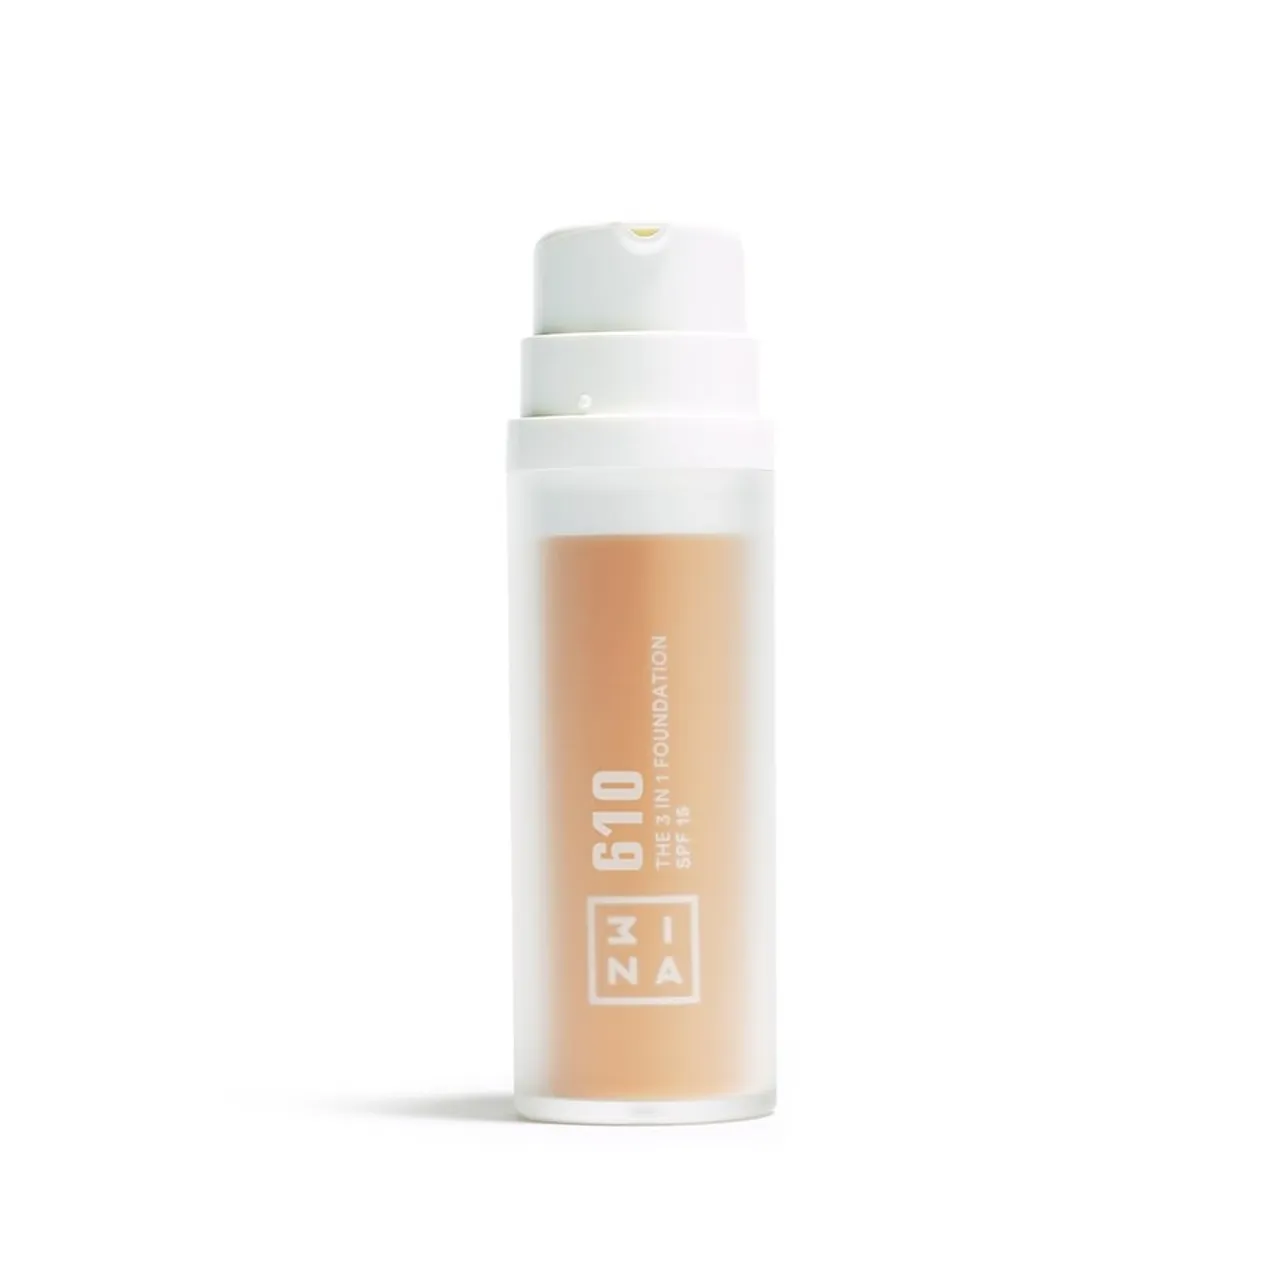 3INA - The 3 in 1 Foundation 30 ml 610 - LIGHT YELLOW